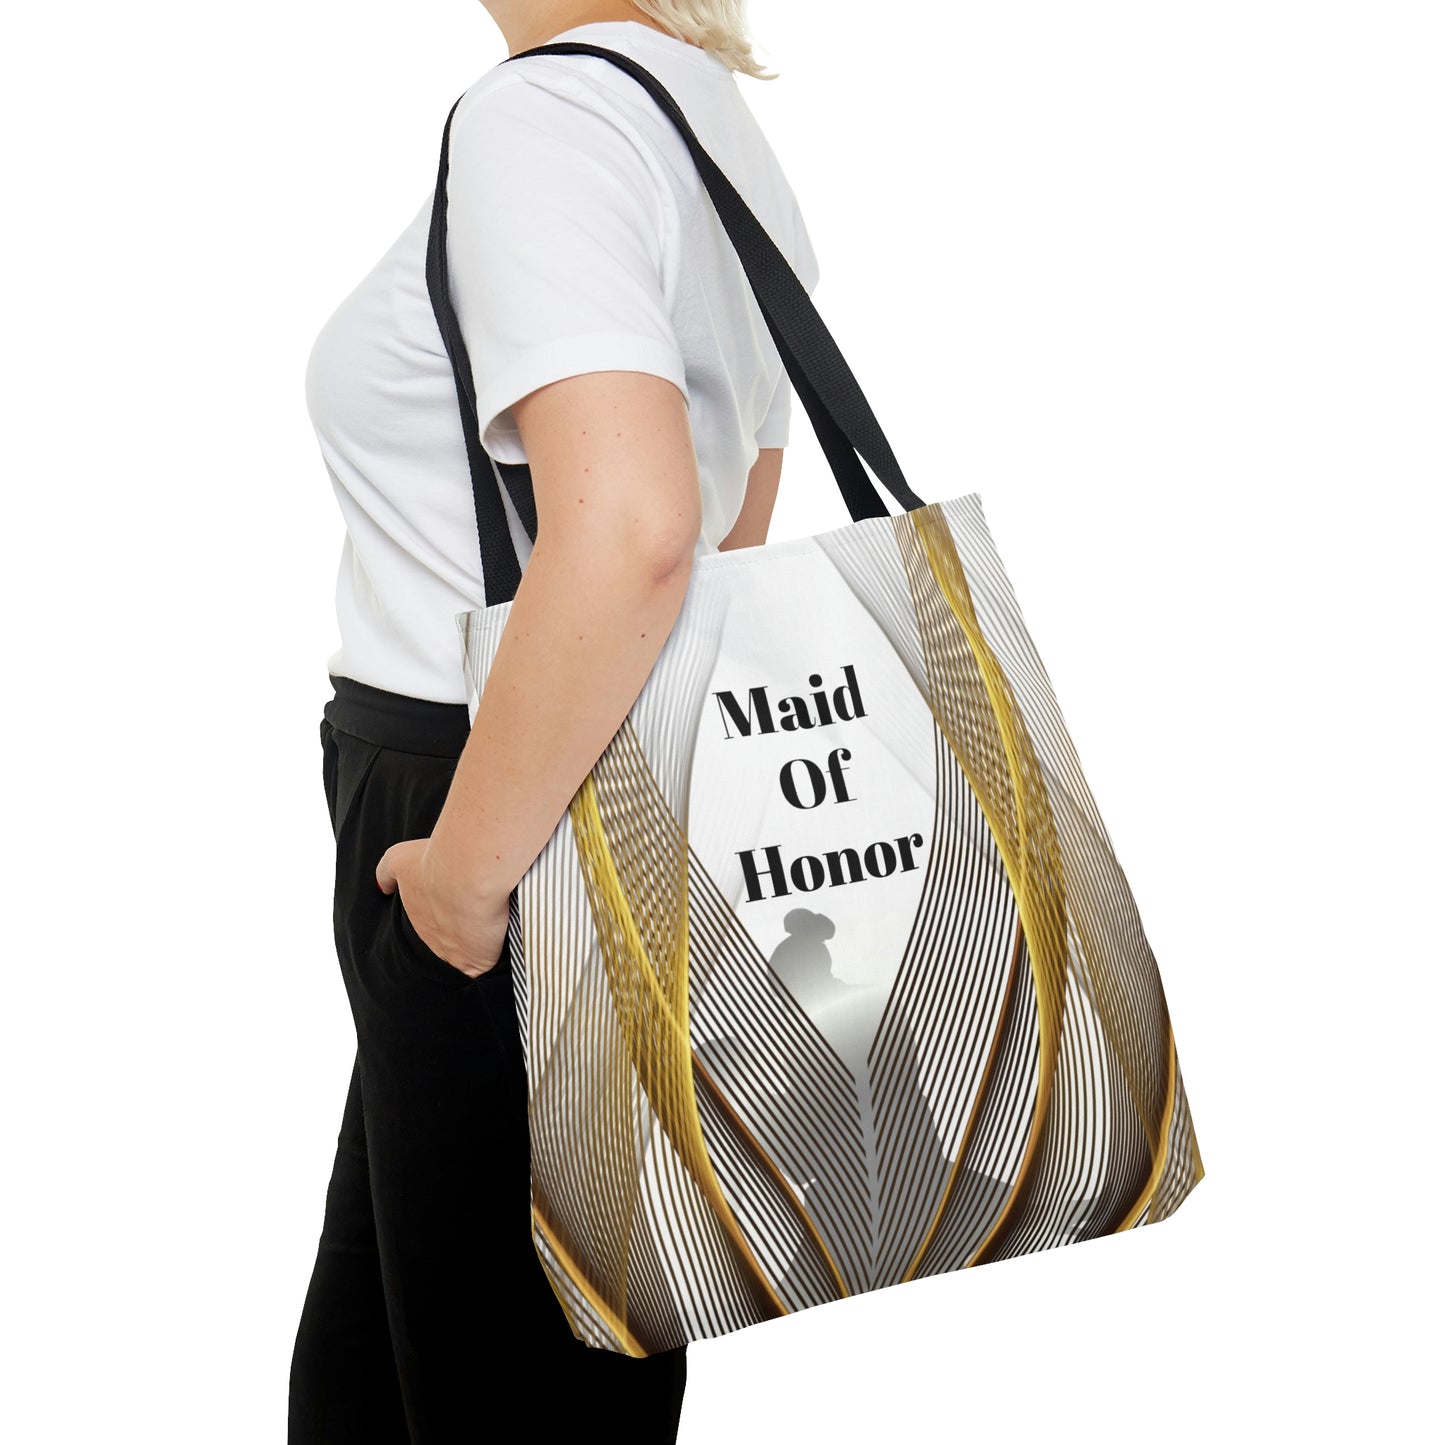 Maid Of Honor Gift Bag | White Tote | Practical Wedding Gift | Bridal Shower Gifts